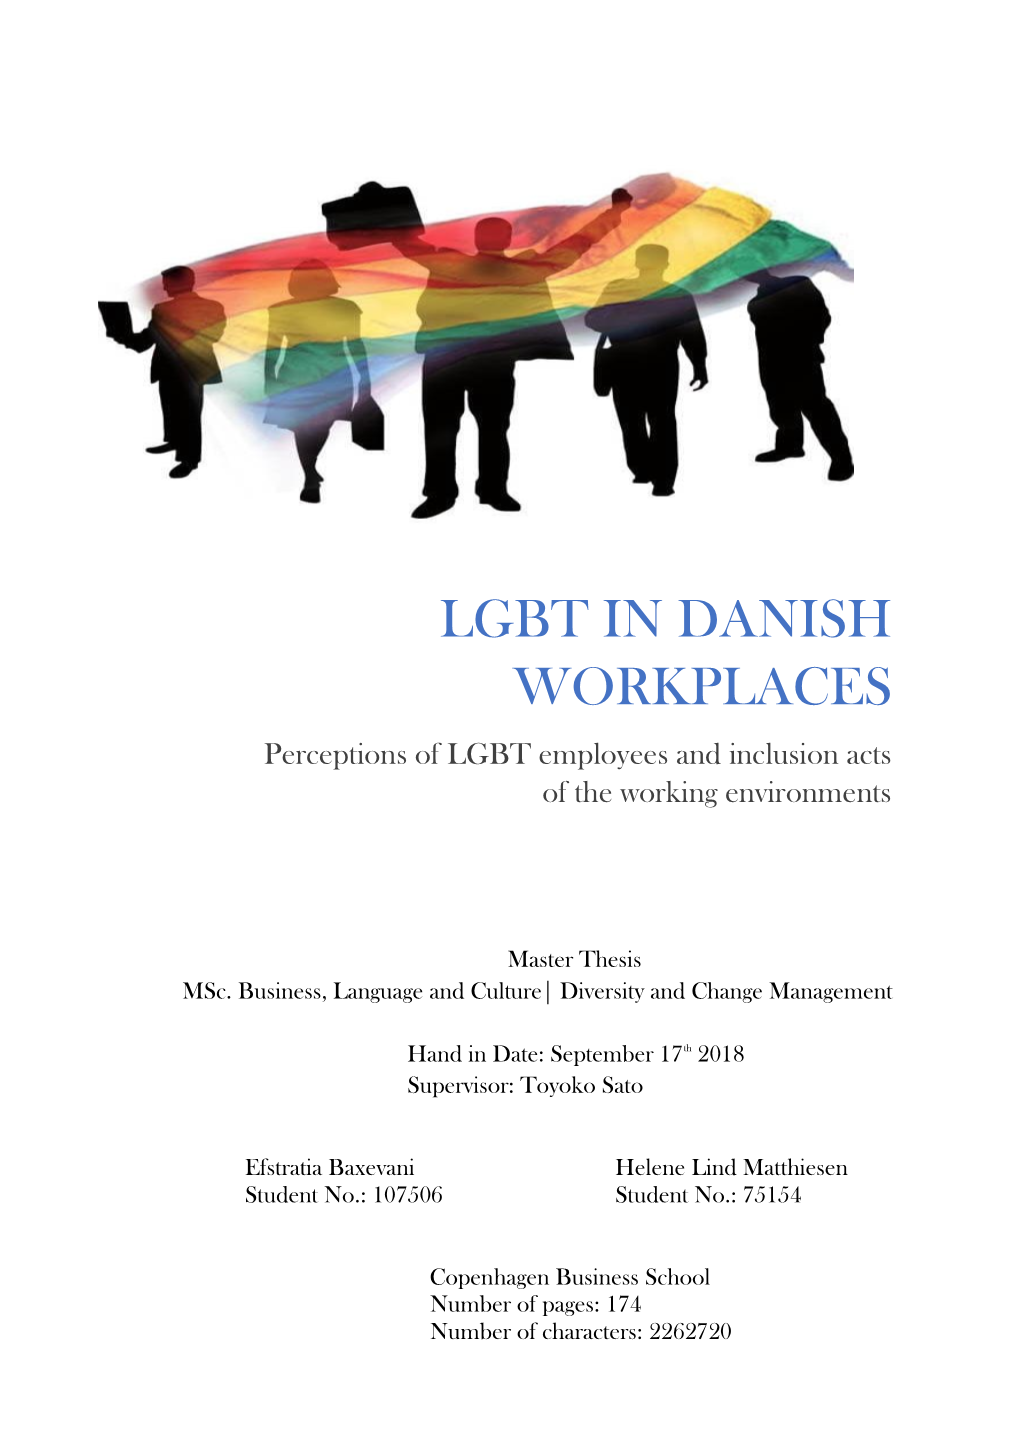 LGBT in DANISH WORKPLACES Perceptions of LGBT Employees and Inclusion Acts of the Working Environments